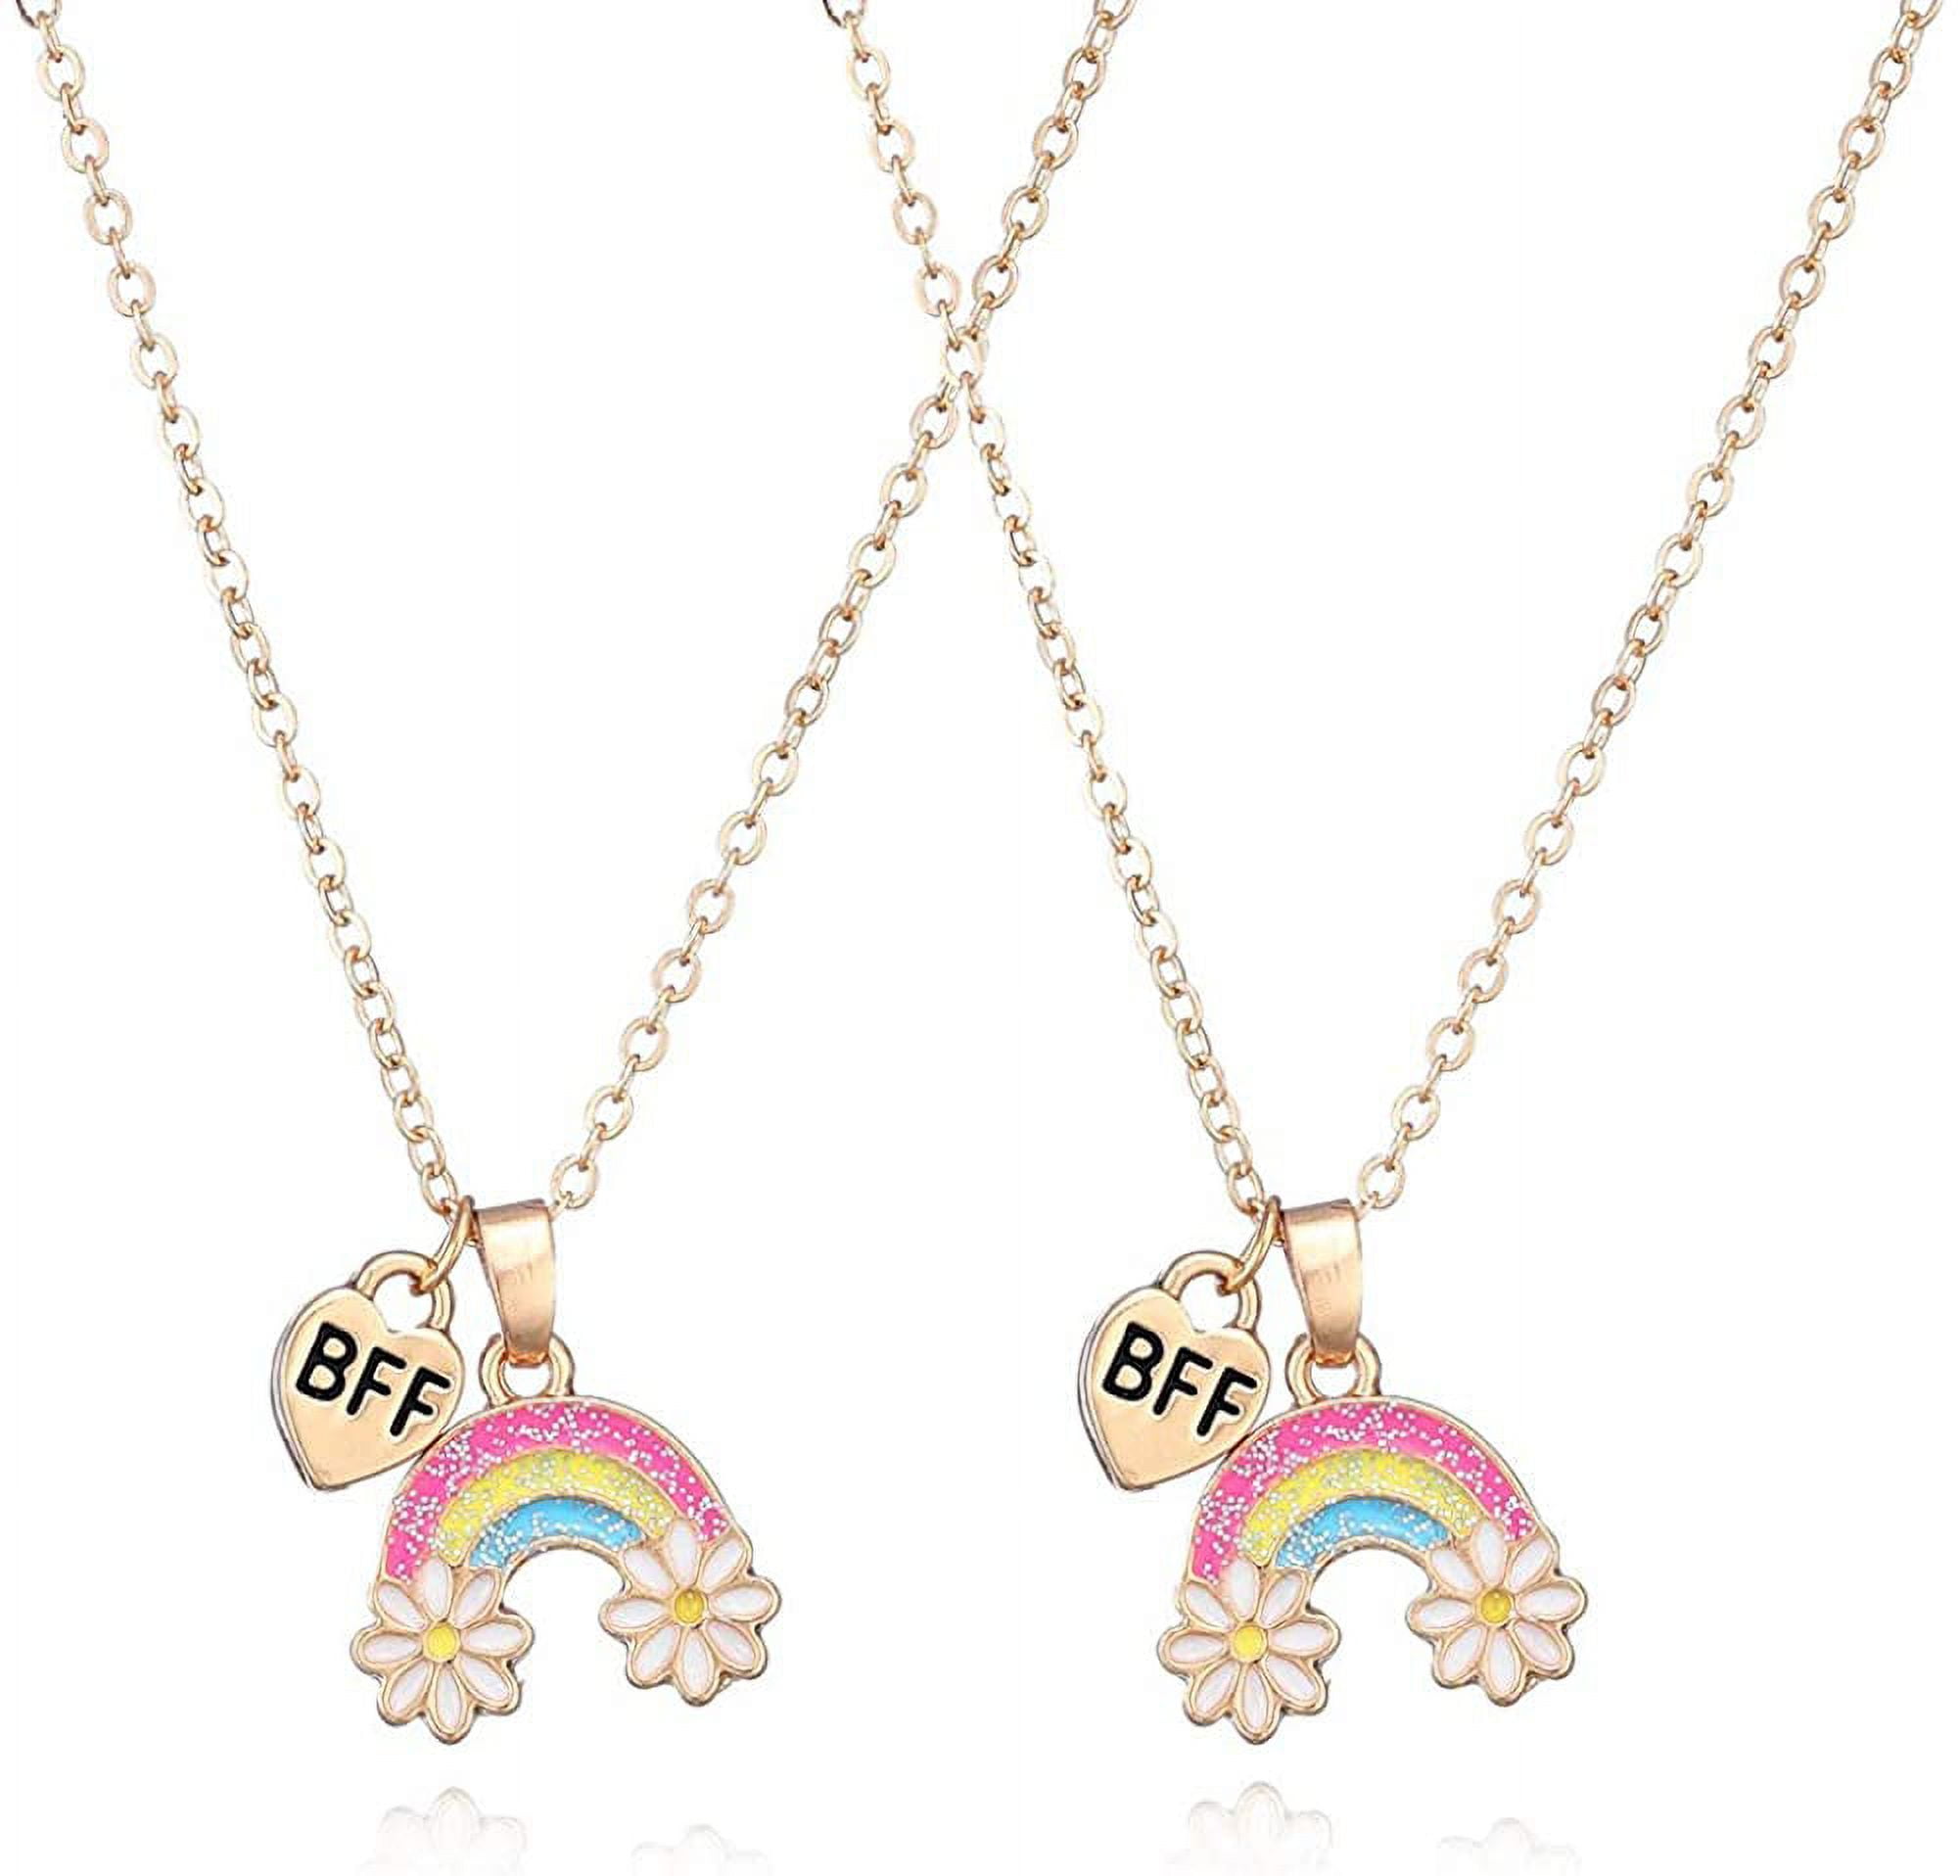 2Pcs BFF Necklaces Best Friends Half Rainbow Pendant Necklaces Friendship Jewelry Gifts for Kids Girls Boys Sisters Friends f1afc8ea d232 4506 92ae 90e83dfdd290.cbef6bc55c3bd7b12a10df0db06f2dc7